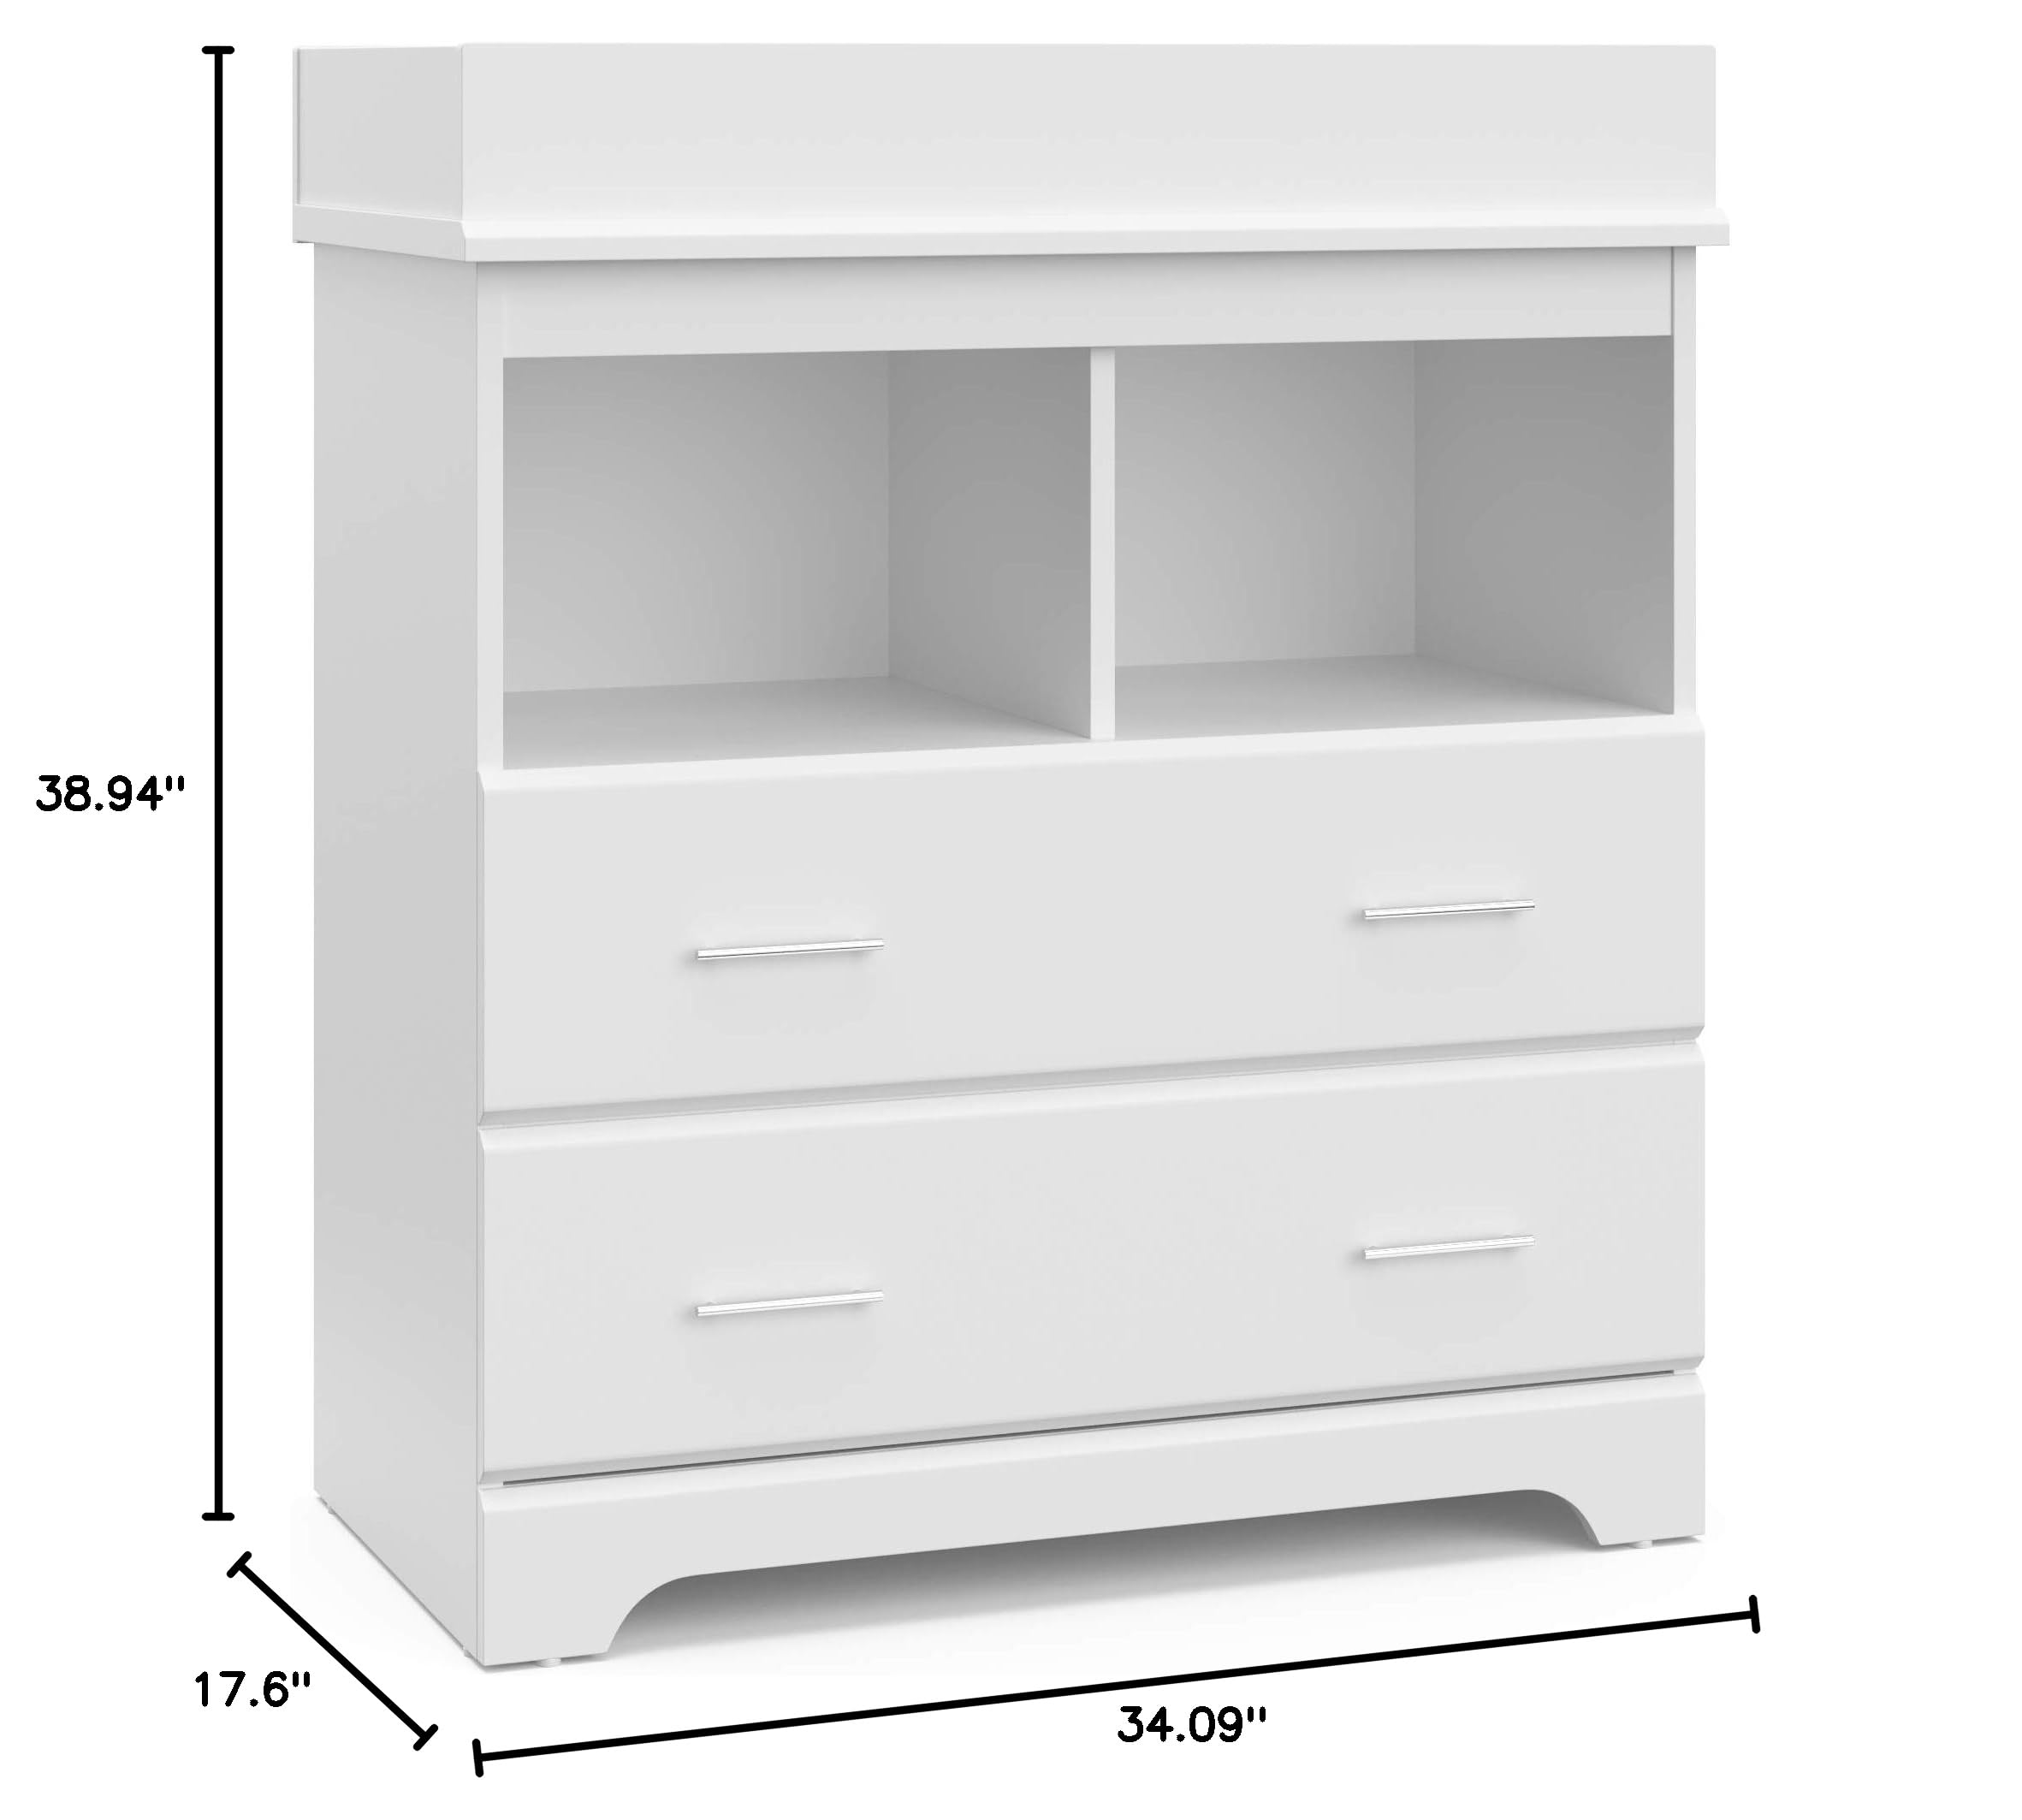 Storkcraft Brookside 2 Drawer Changing Table Dresser (White) – Nursery Dresser Organizer with Changing Table Topper, Chest of Drawers for Bedroom with 2 Drawers, Universal Design